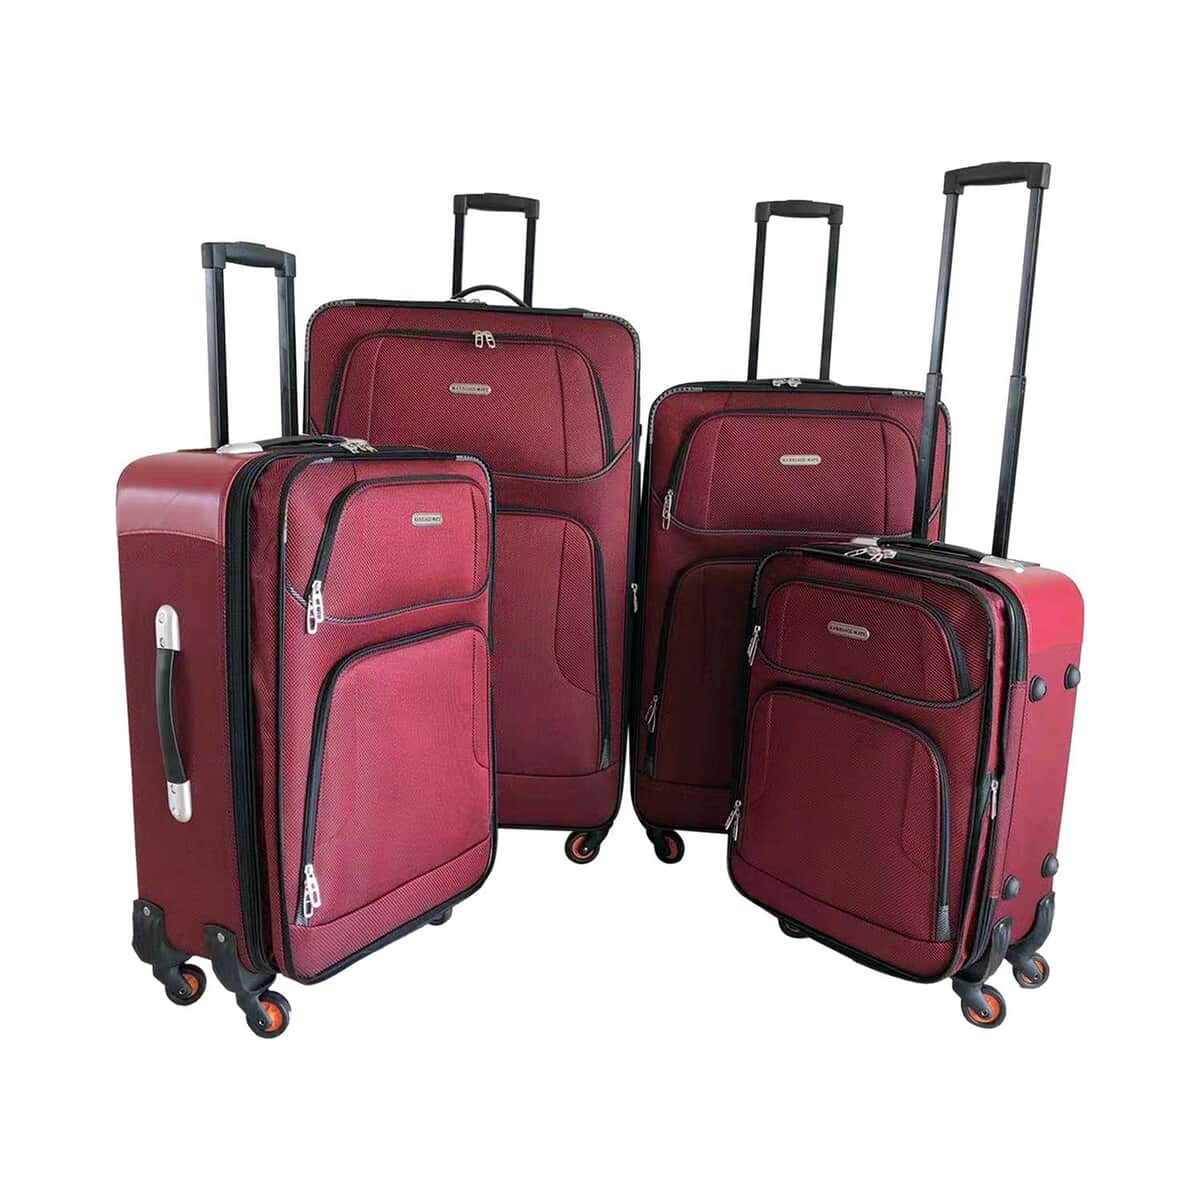 Karriage-Mate 4 piece Lightweight Durable and Expandable Luggage Set With 360 Degree Spinner Wheels Adjustable Telescopic Handle Adjustable Internal Straps - Burgundy image number 0